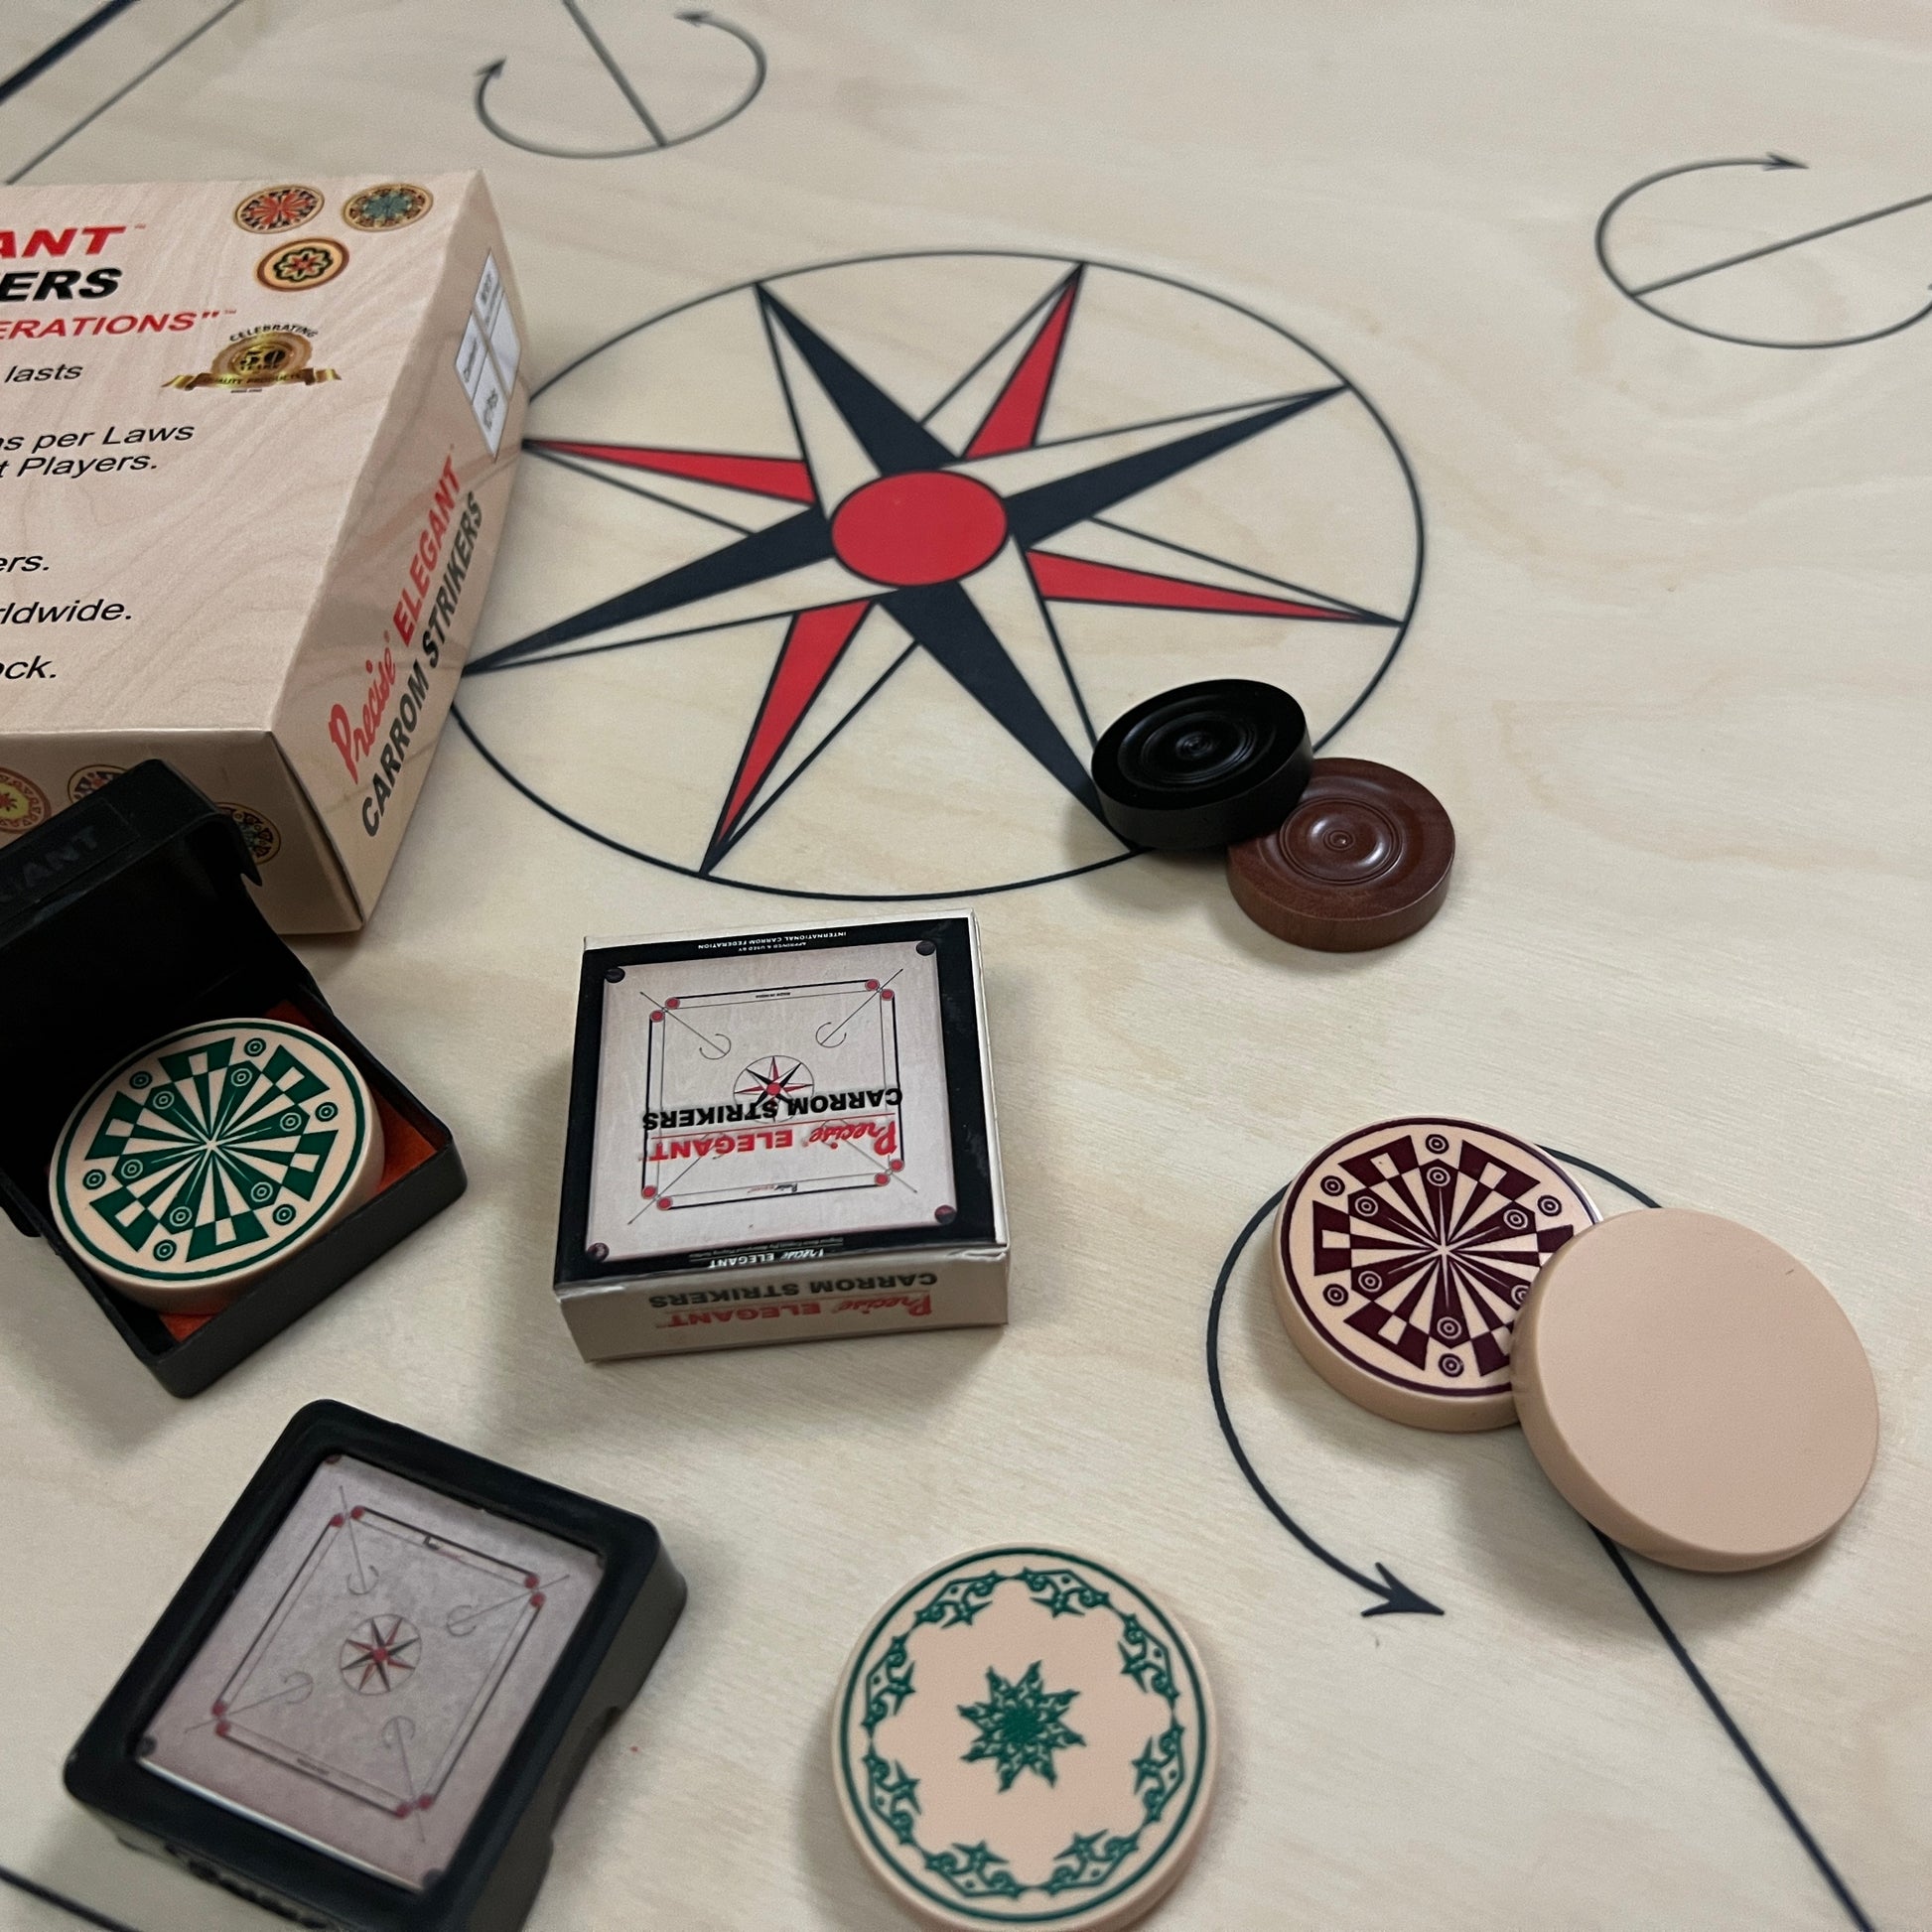 Tournament-grade Precise Elegant carrom striker, uniquely packed in a patented carrom shape box, exclusively available at Black Ash Sports.